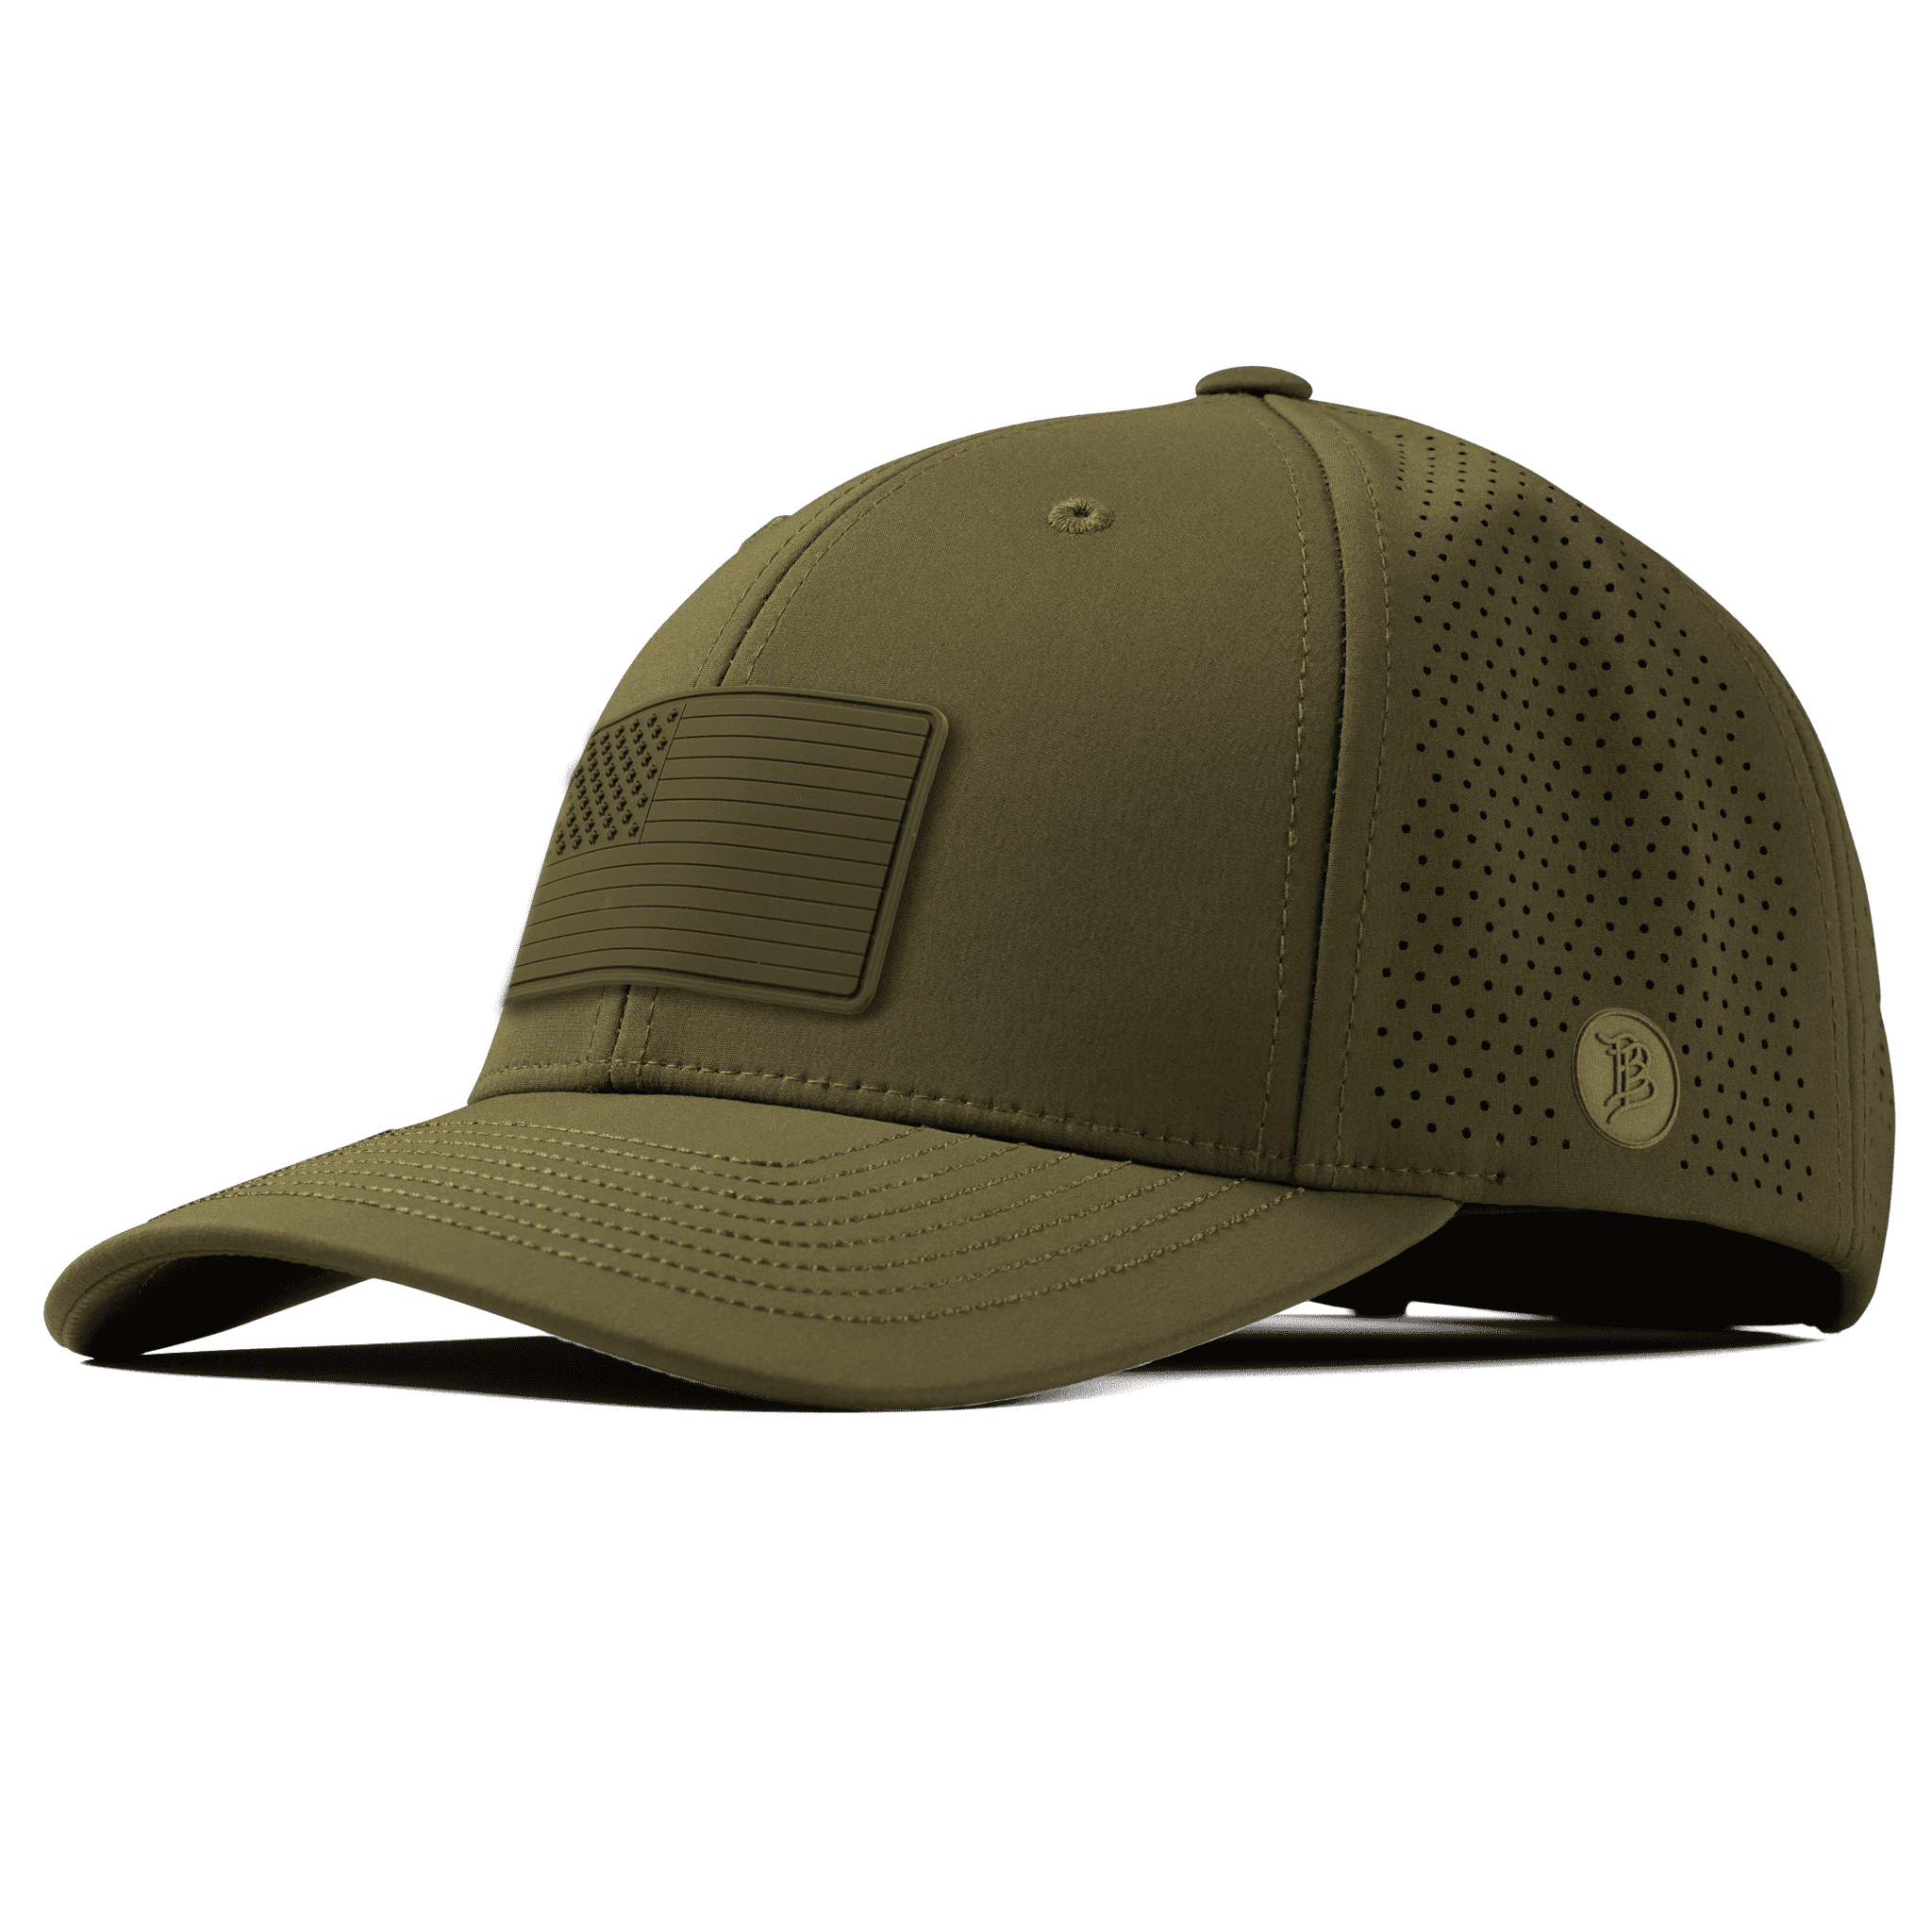 Old Glory Stealth PVC Elite Curved Front Loden